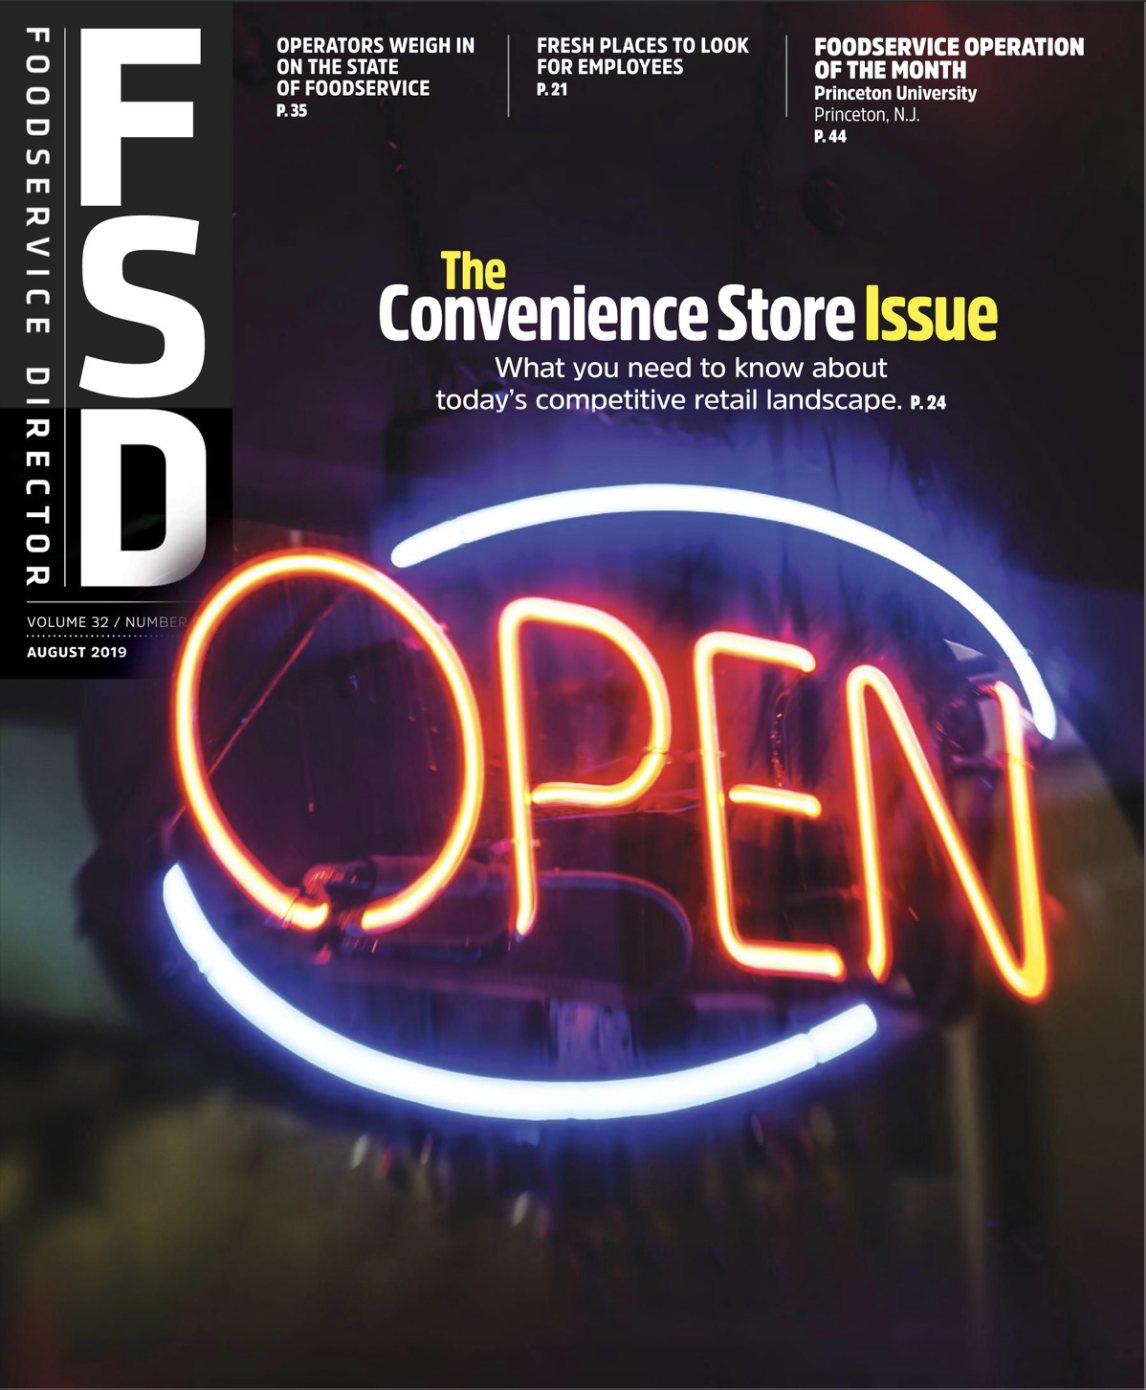 FoodService Director Magazine August 2019 Issue